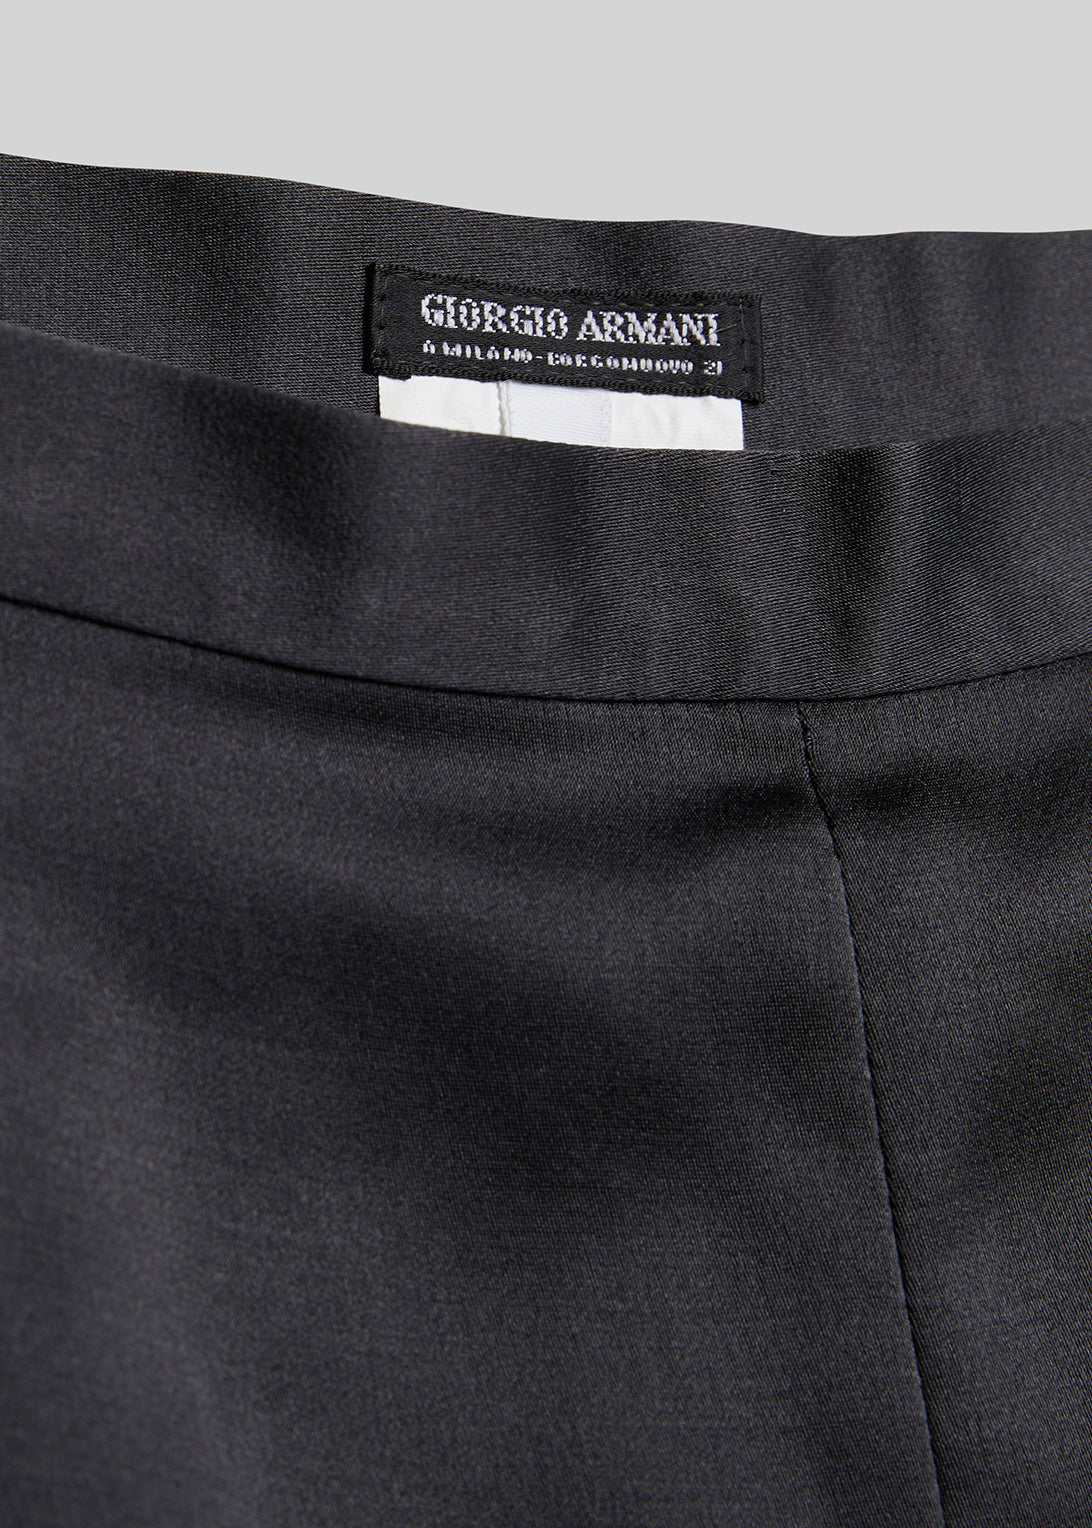 Automatic Men Blue Plain Twill Armani Formal Pant, 28 To 36 Waist Size  Available at Best Price in Pune | Jm Garments